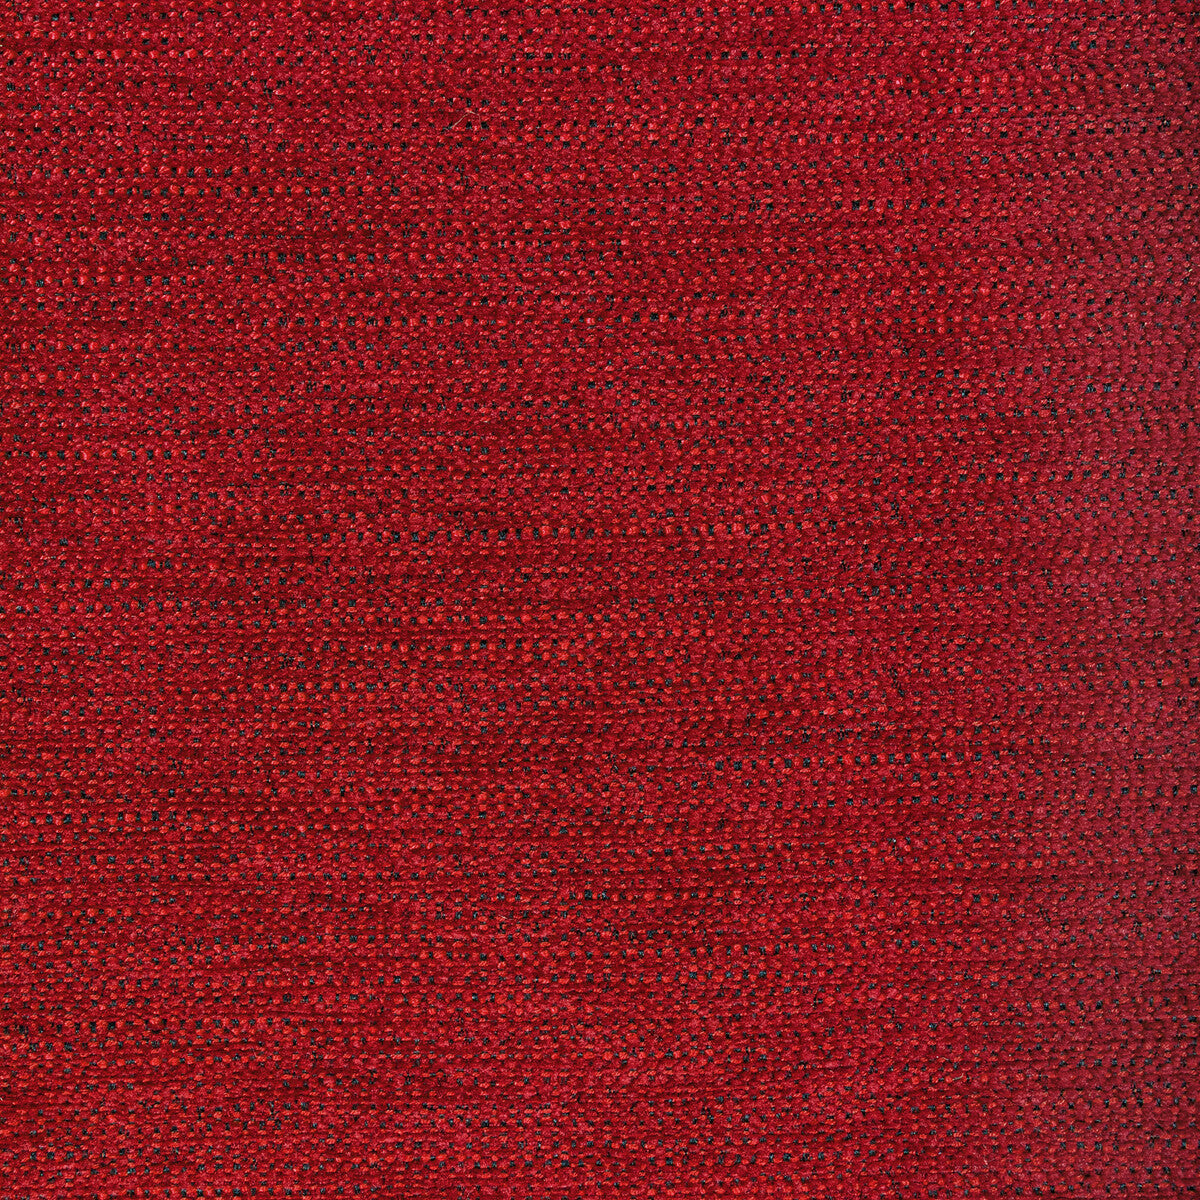 Recoup fabric in caliente color - pattern 36569.19.0 - by Kravet Contract in the Seaqual collection